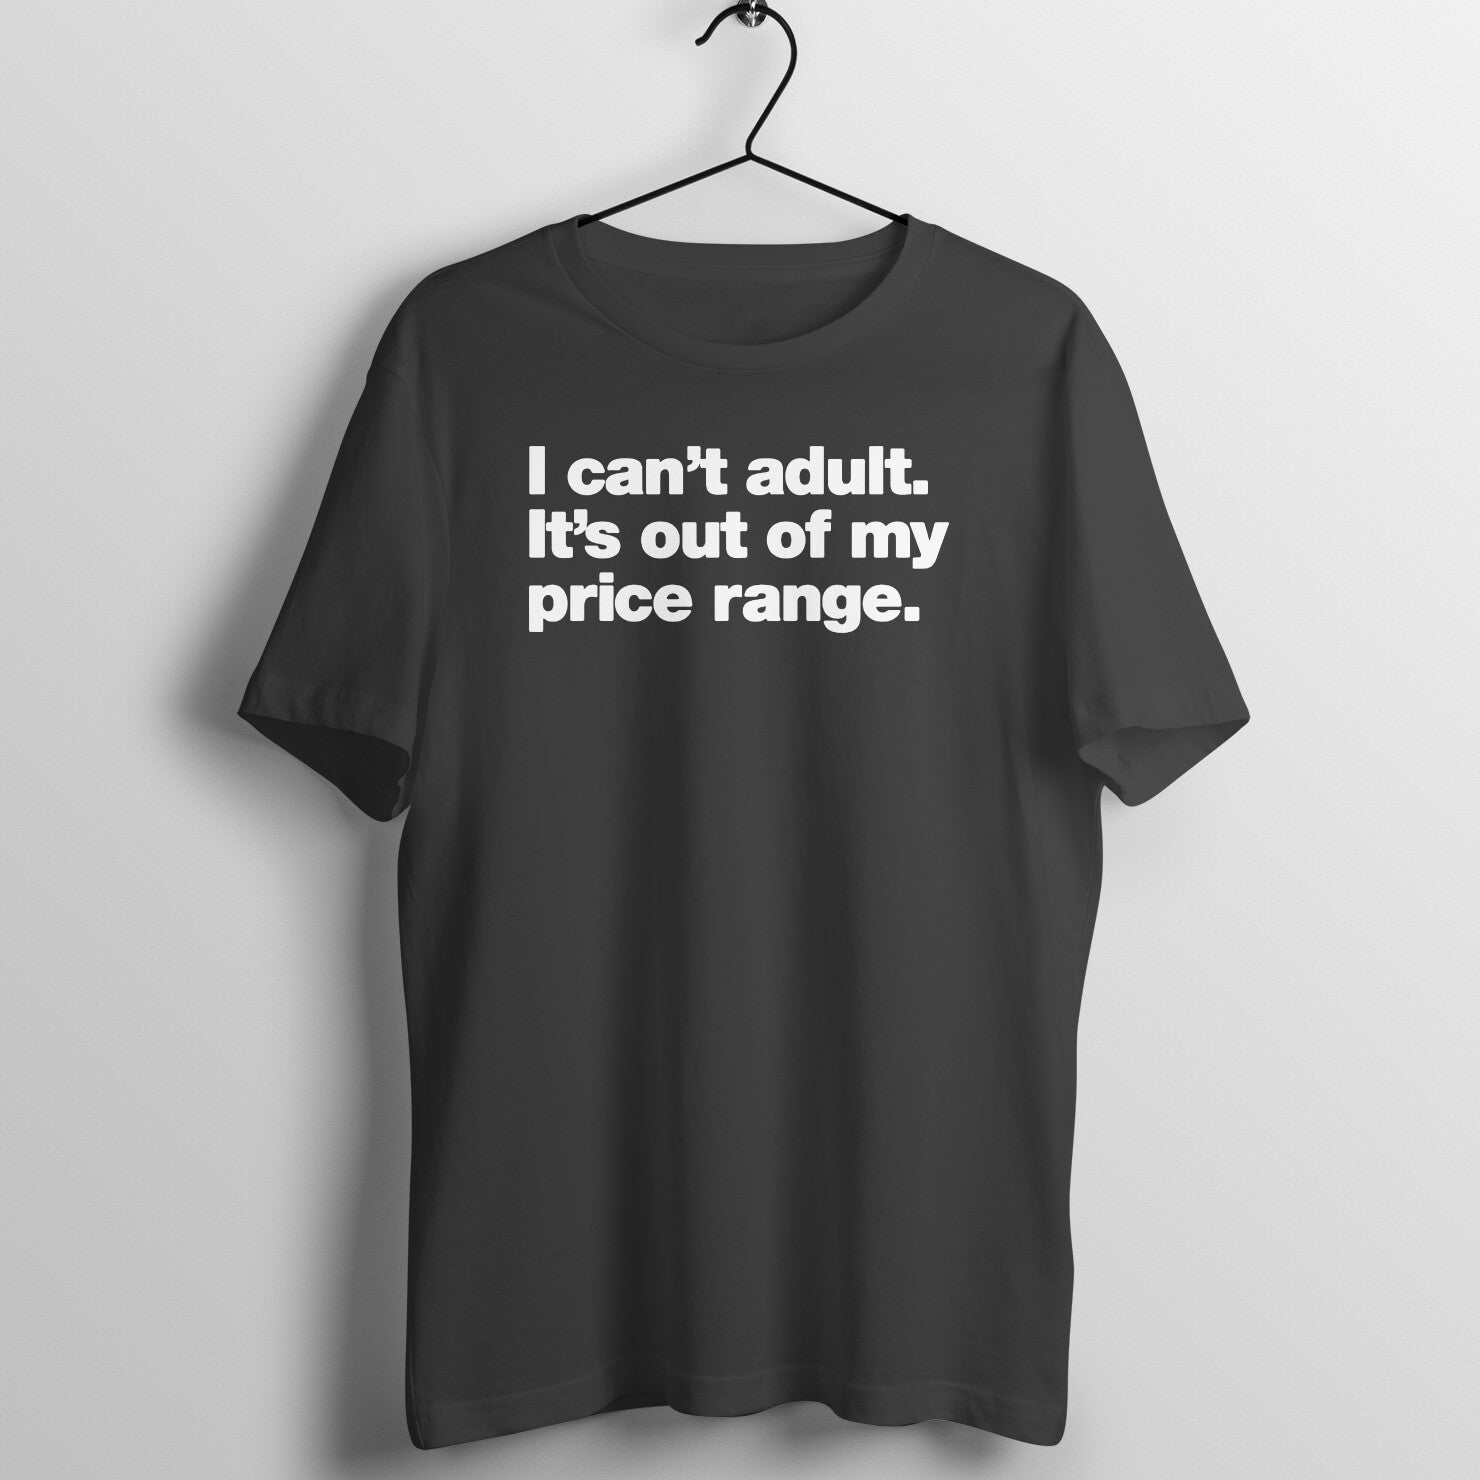 I Can't Adult It's Out of my Price Range Funny Black T Shirt for Men and Women